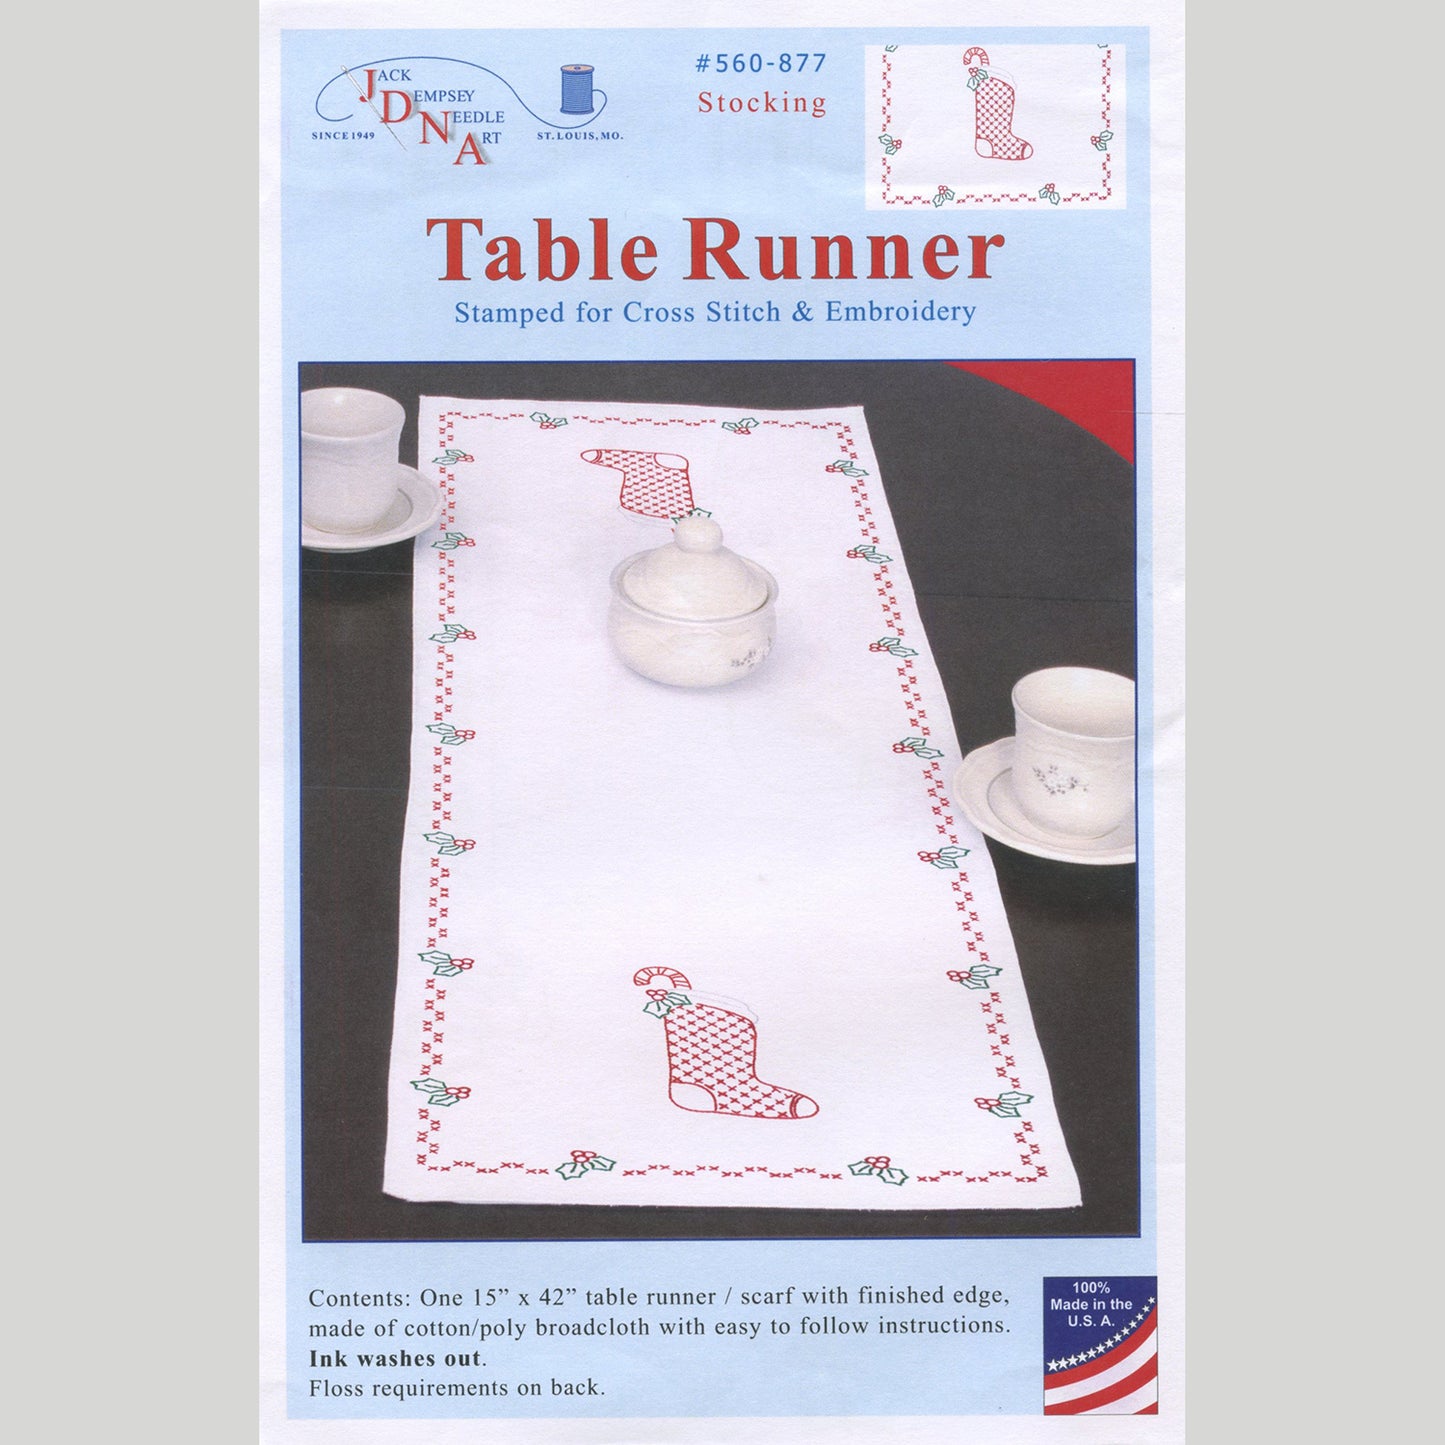 Stocking Embroidery Table Runner Kit Alternative View #4